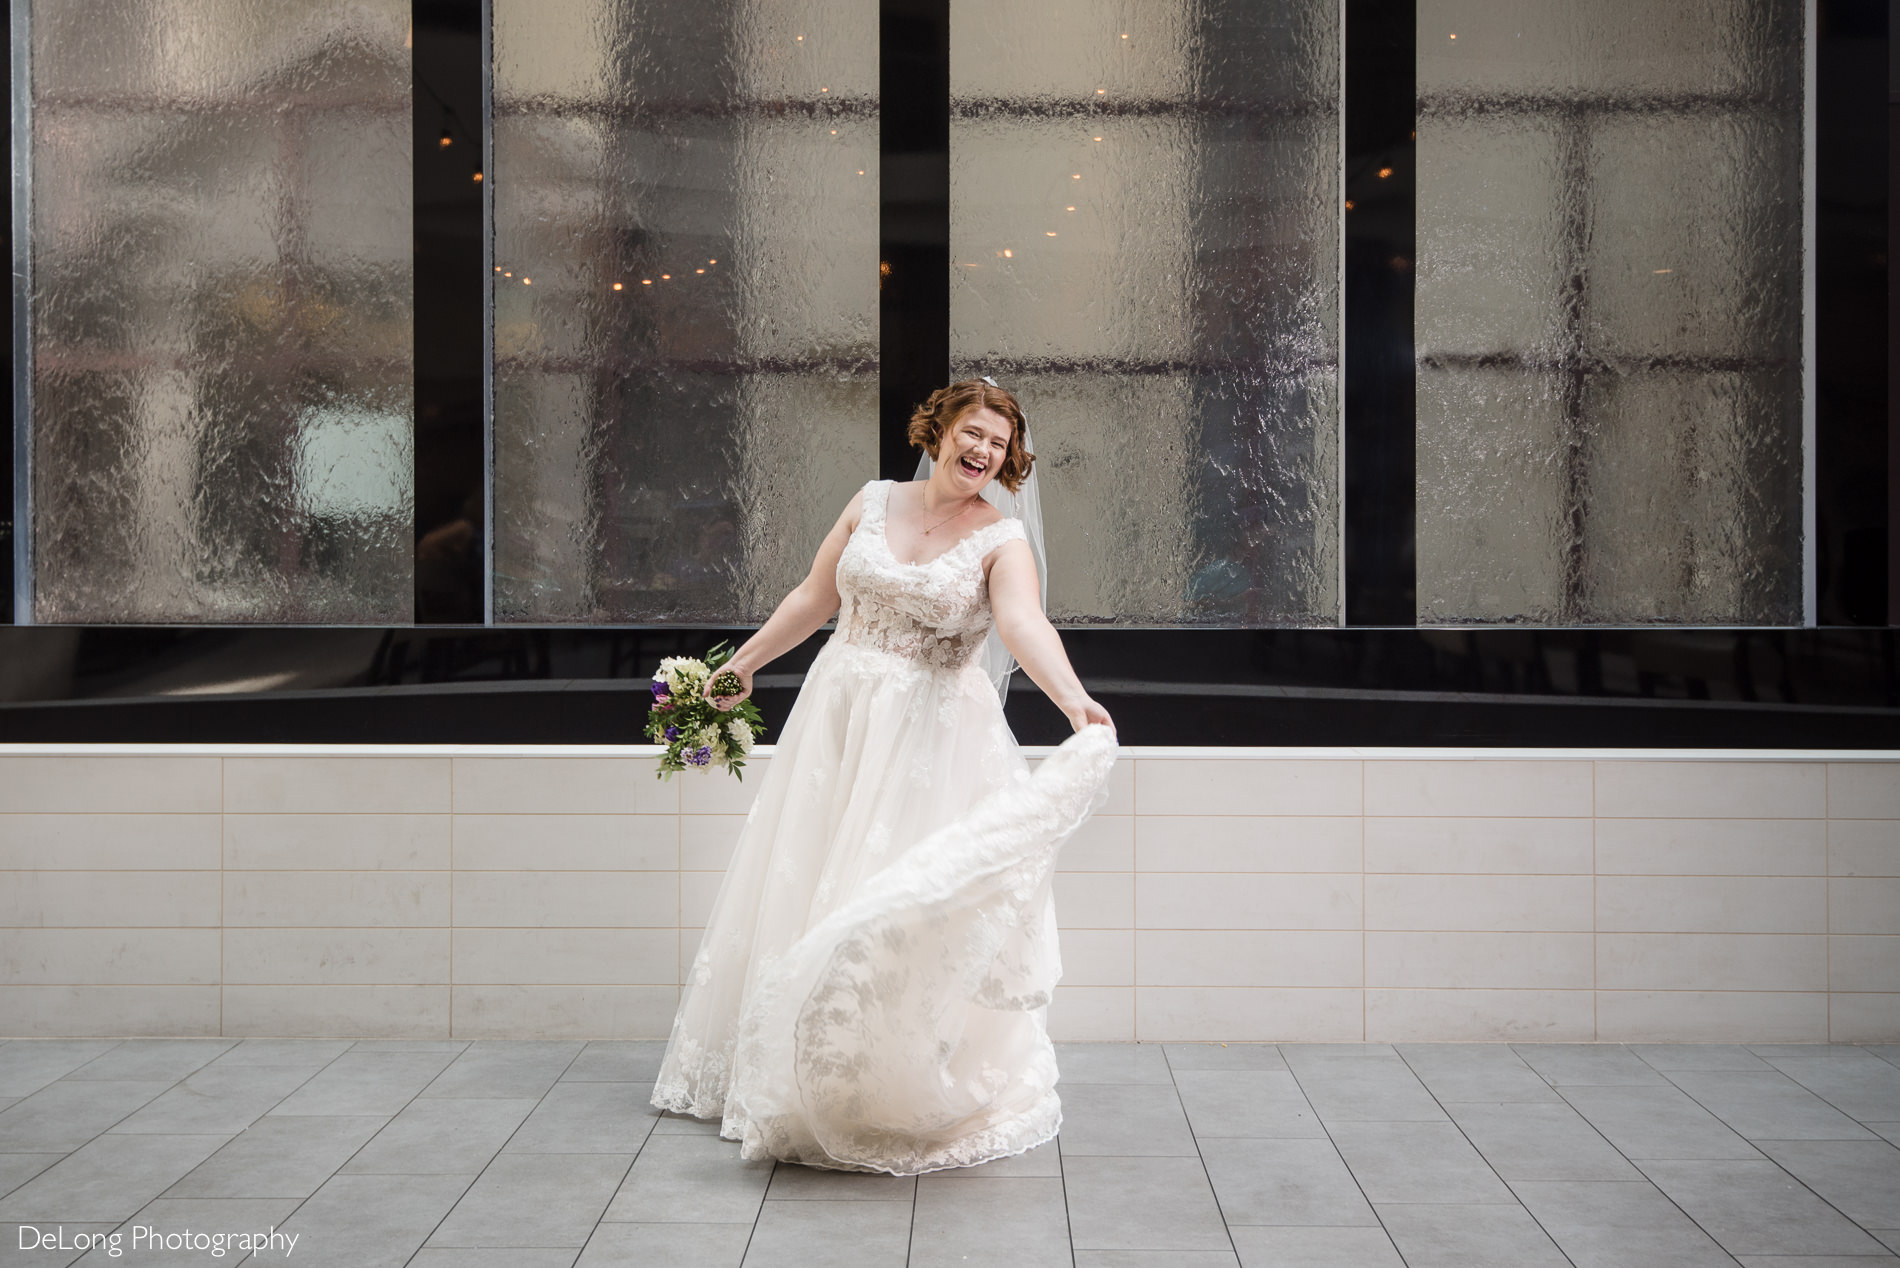 Fun bridal portrait in atrium of Embassy Suites by Hilton Charlotte by Charlotte wedding photographers DeLong Photography